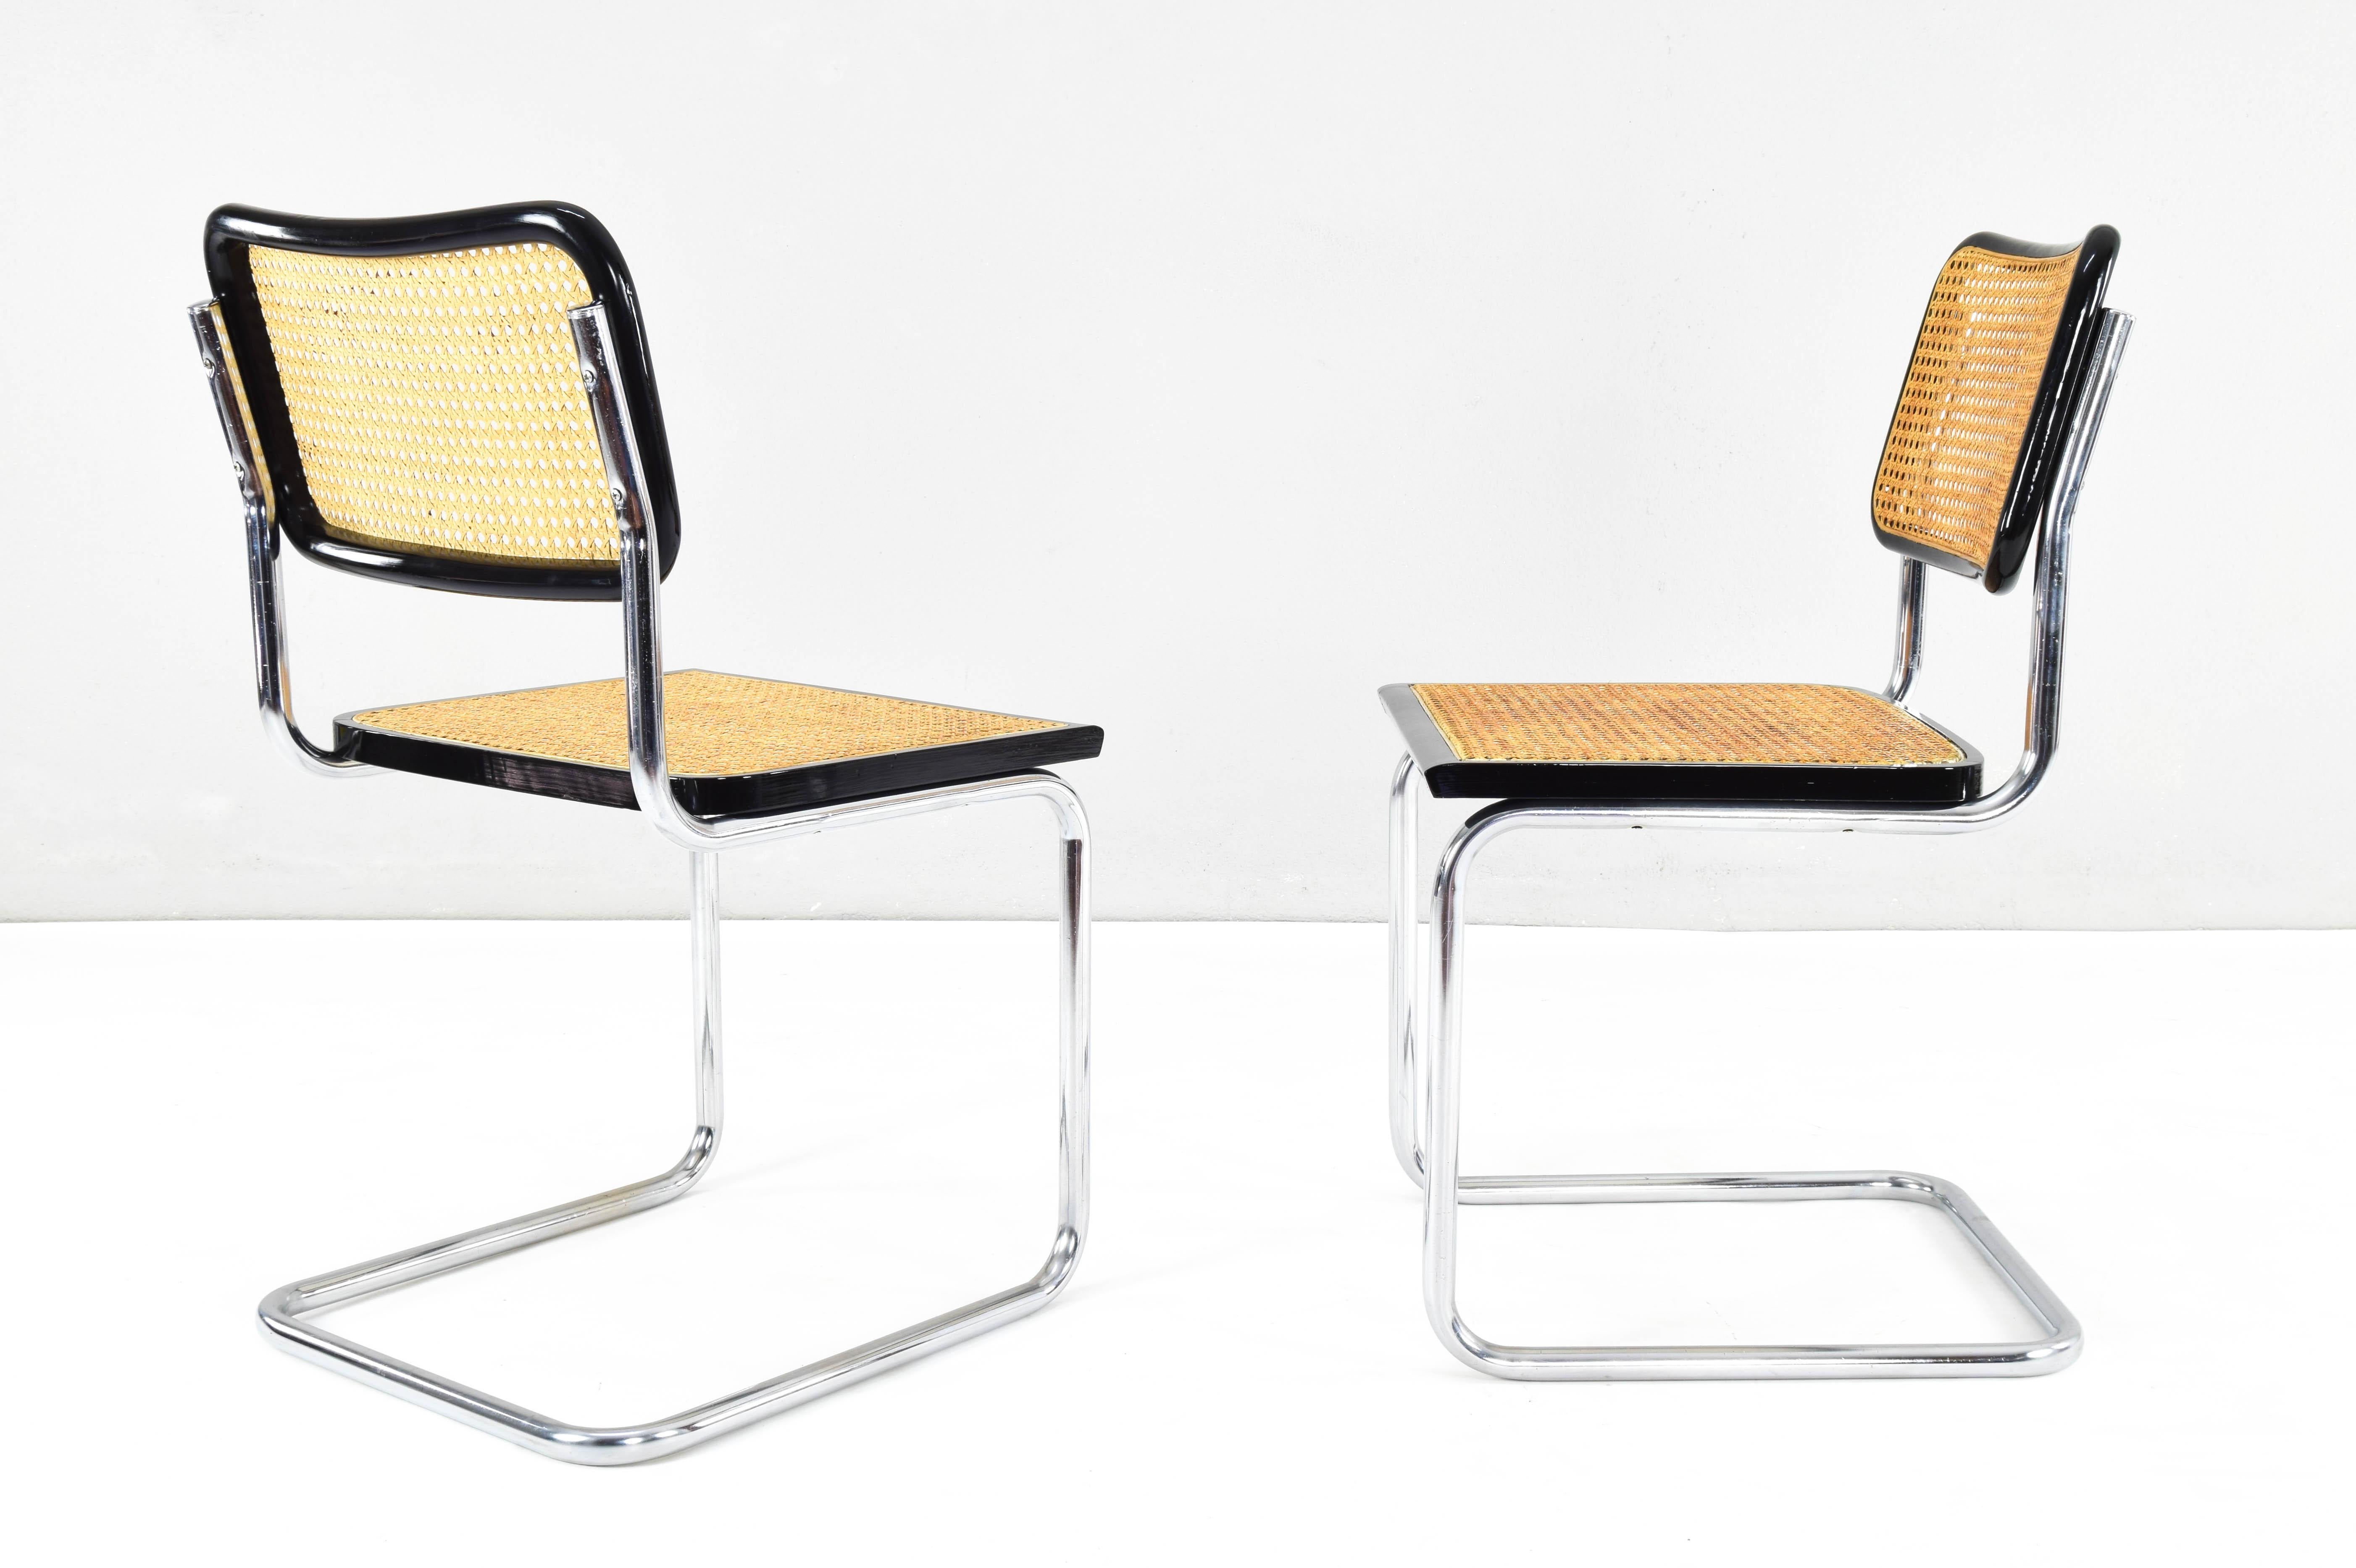 Steel Set of Two Mid-Century Modern Marcel Breuer B32 Cesca Chairs, Italy 1970s